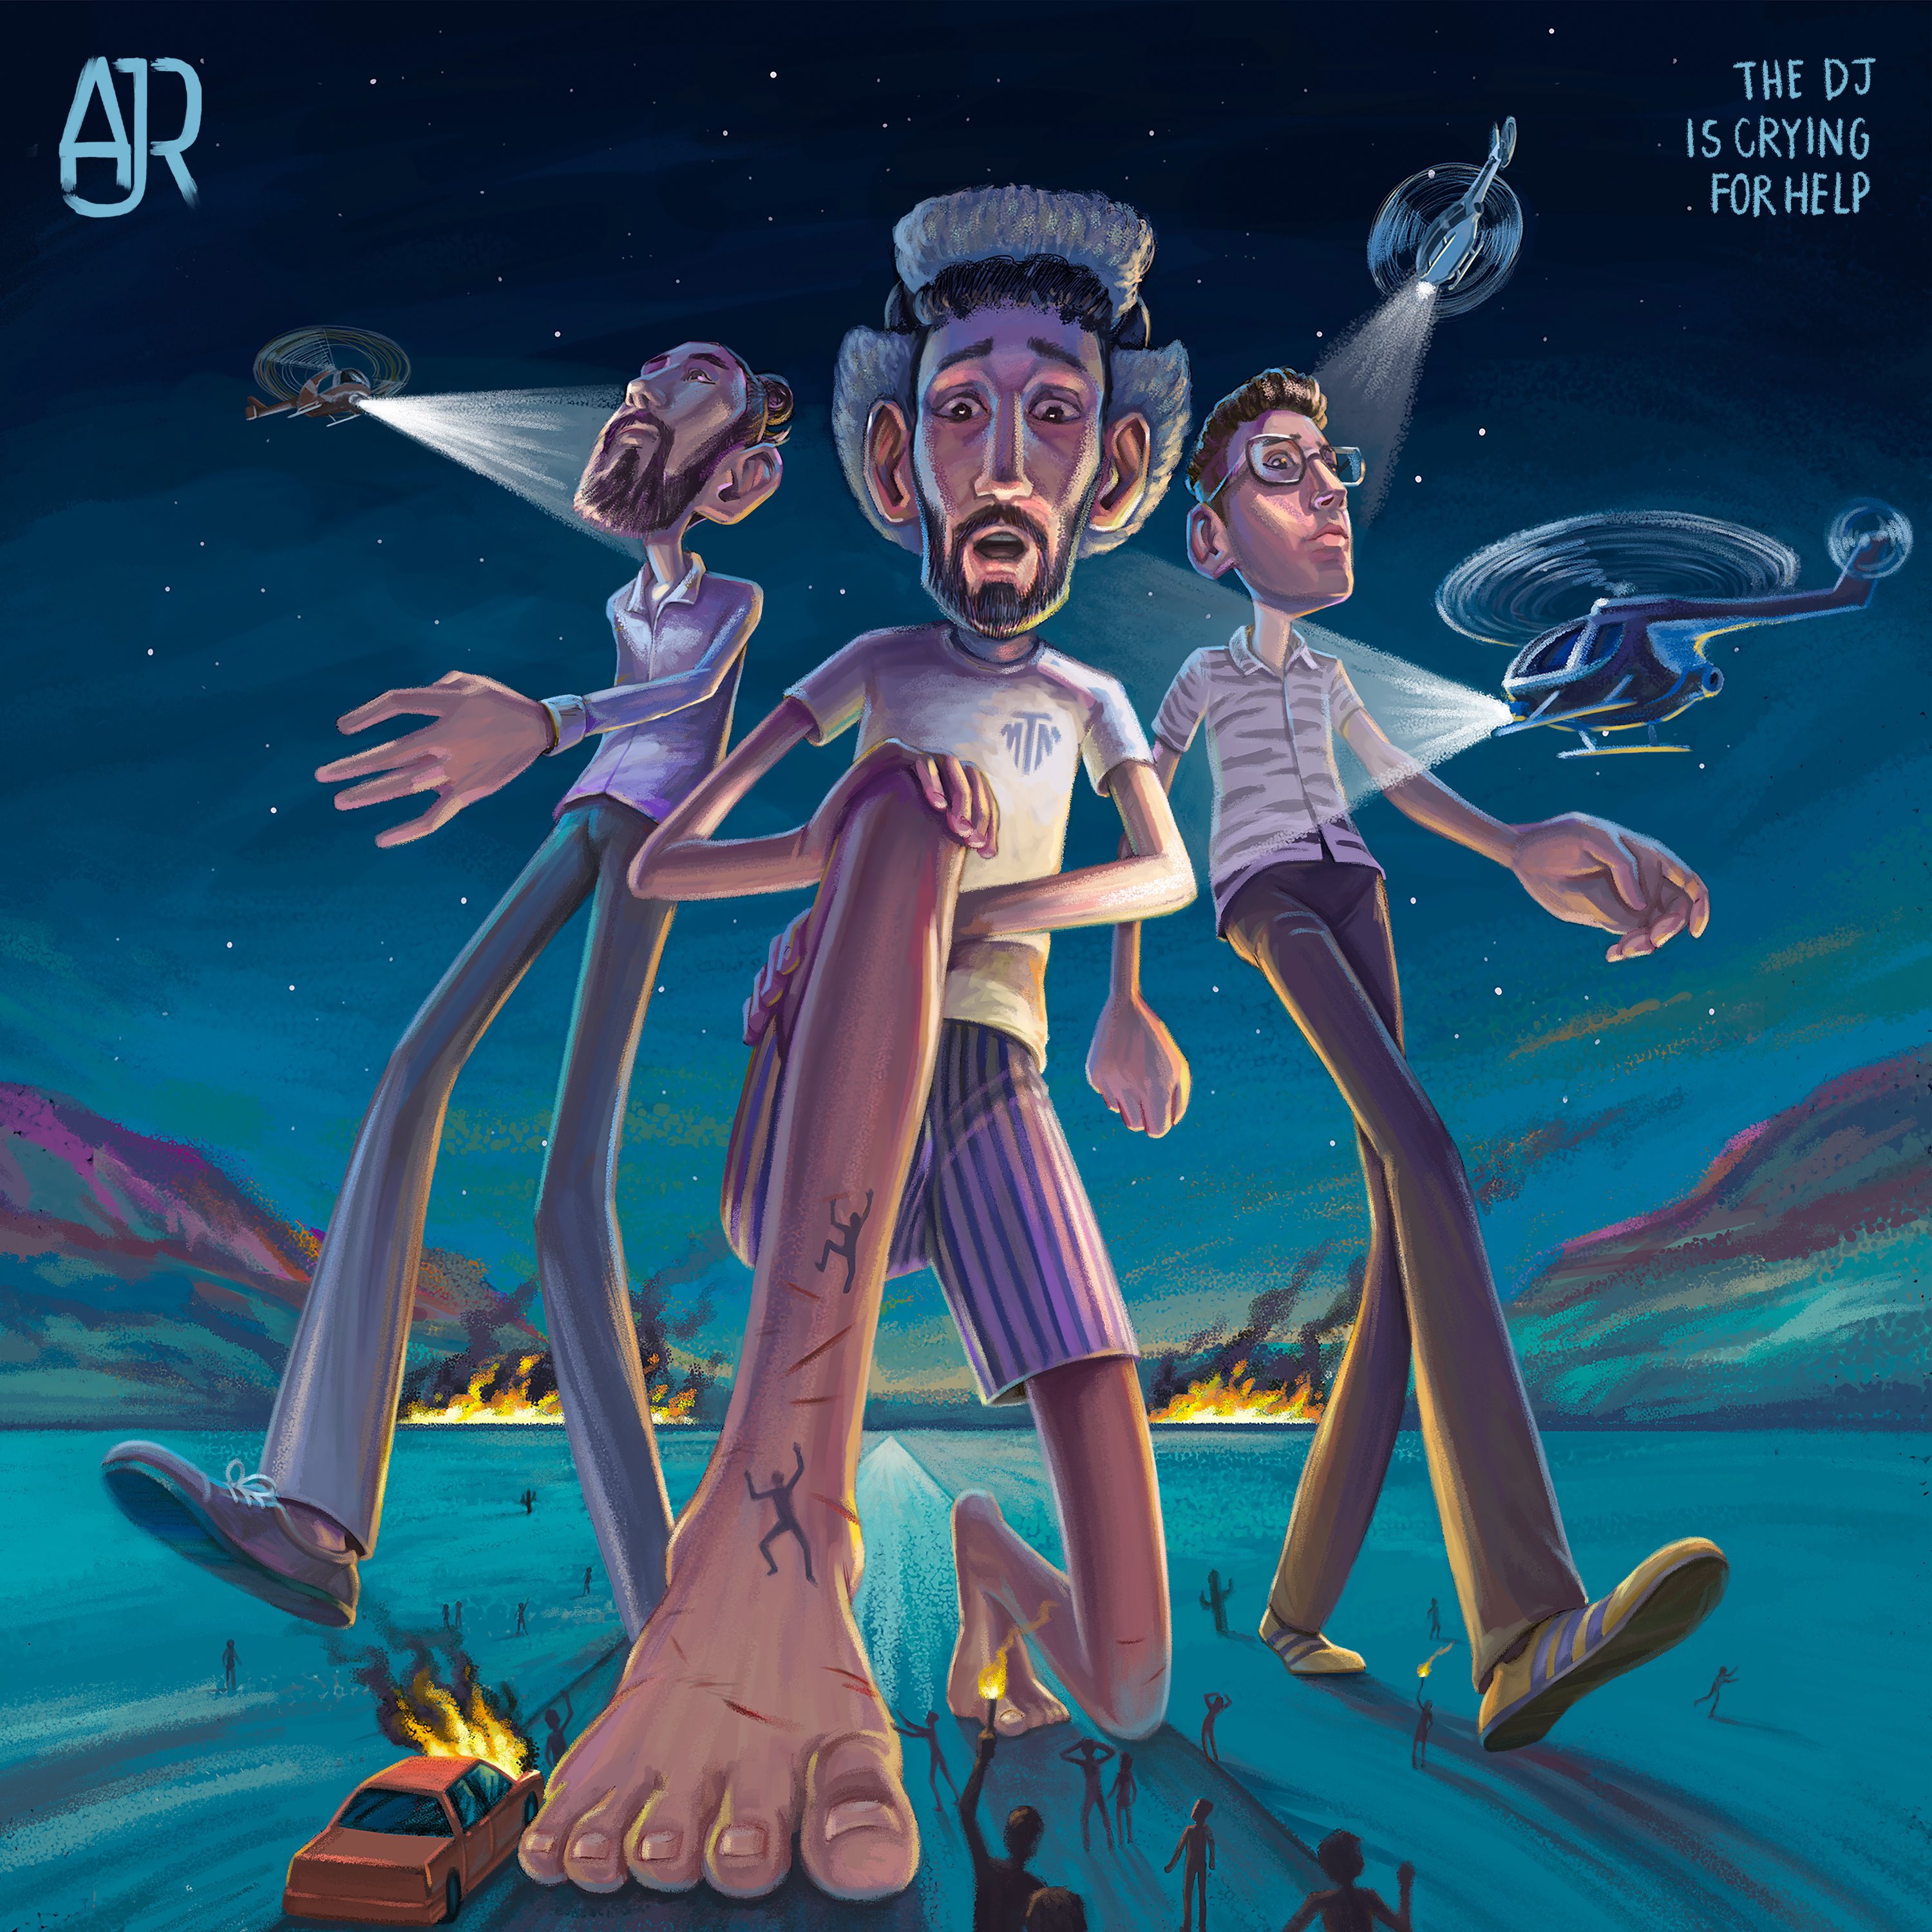 100 Bad Days by AJR Is Pointless!